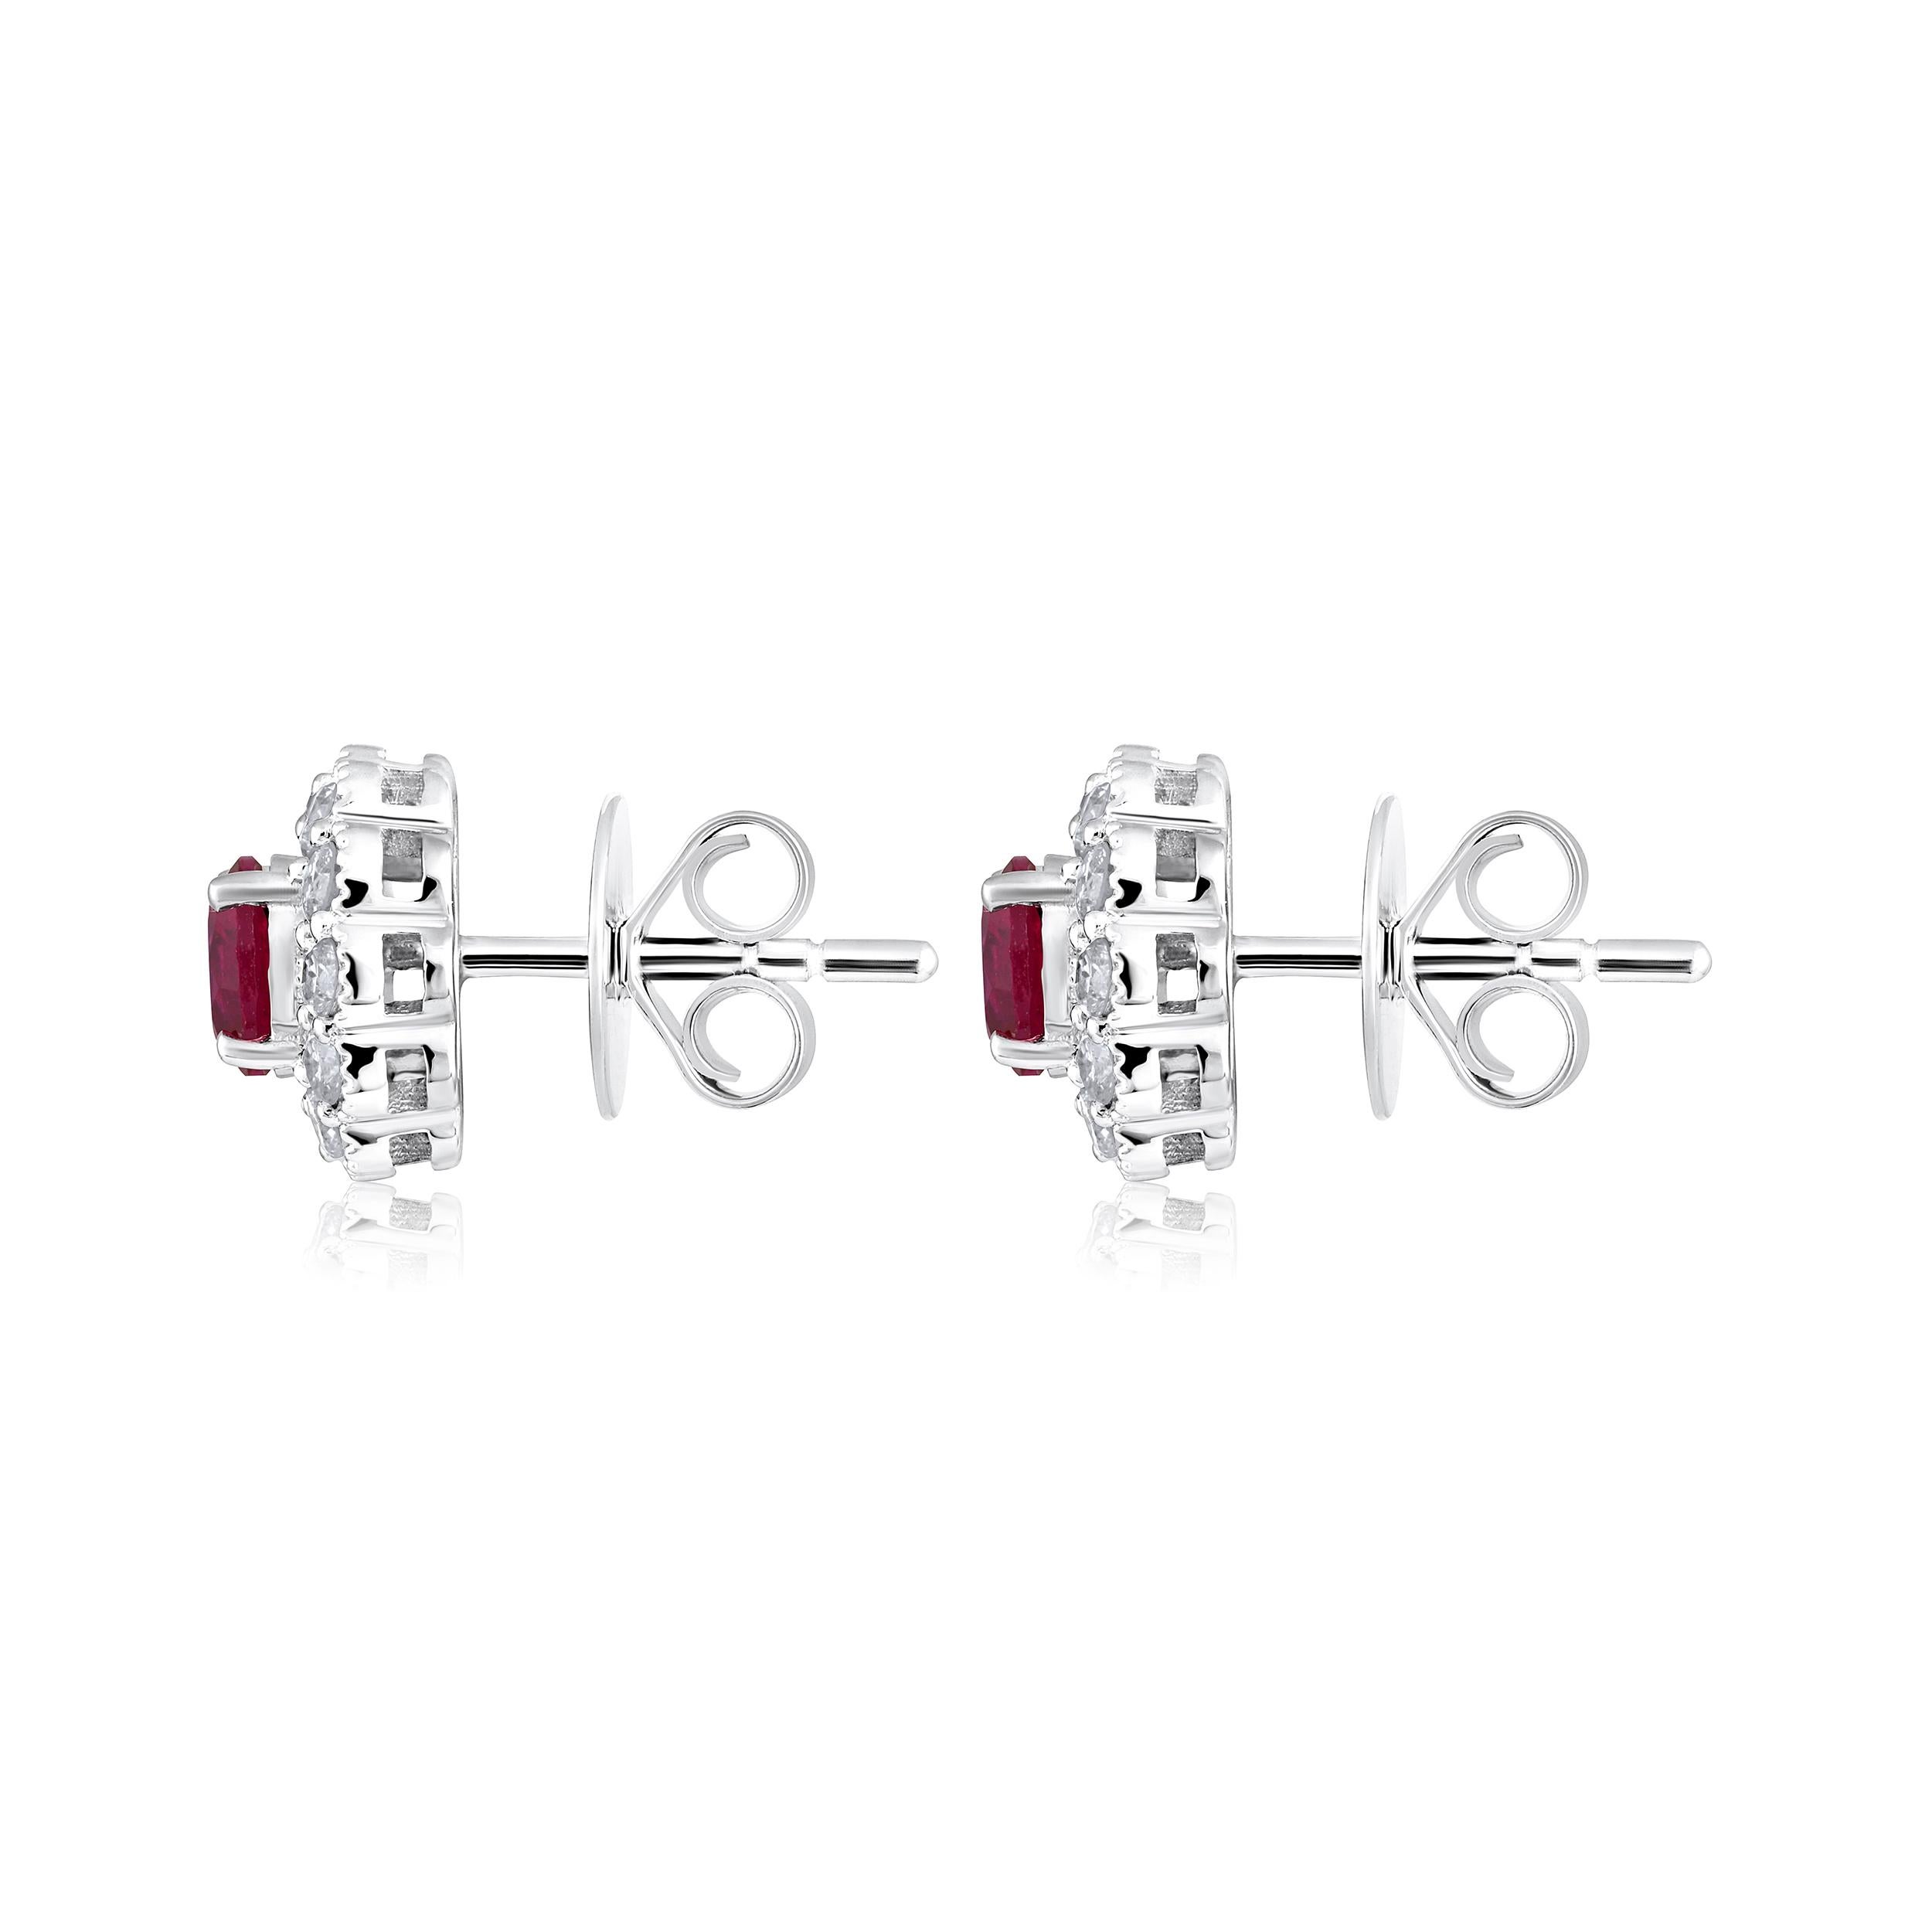 Brilliant Cut Certified 14k Gold 1.8ct Natural Diamond W/ Lab Ruby Round Flower Stud Earrings For Sale